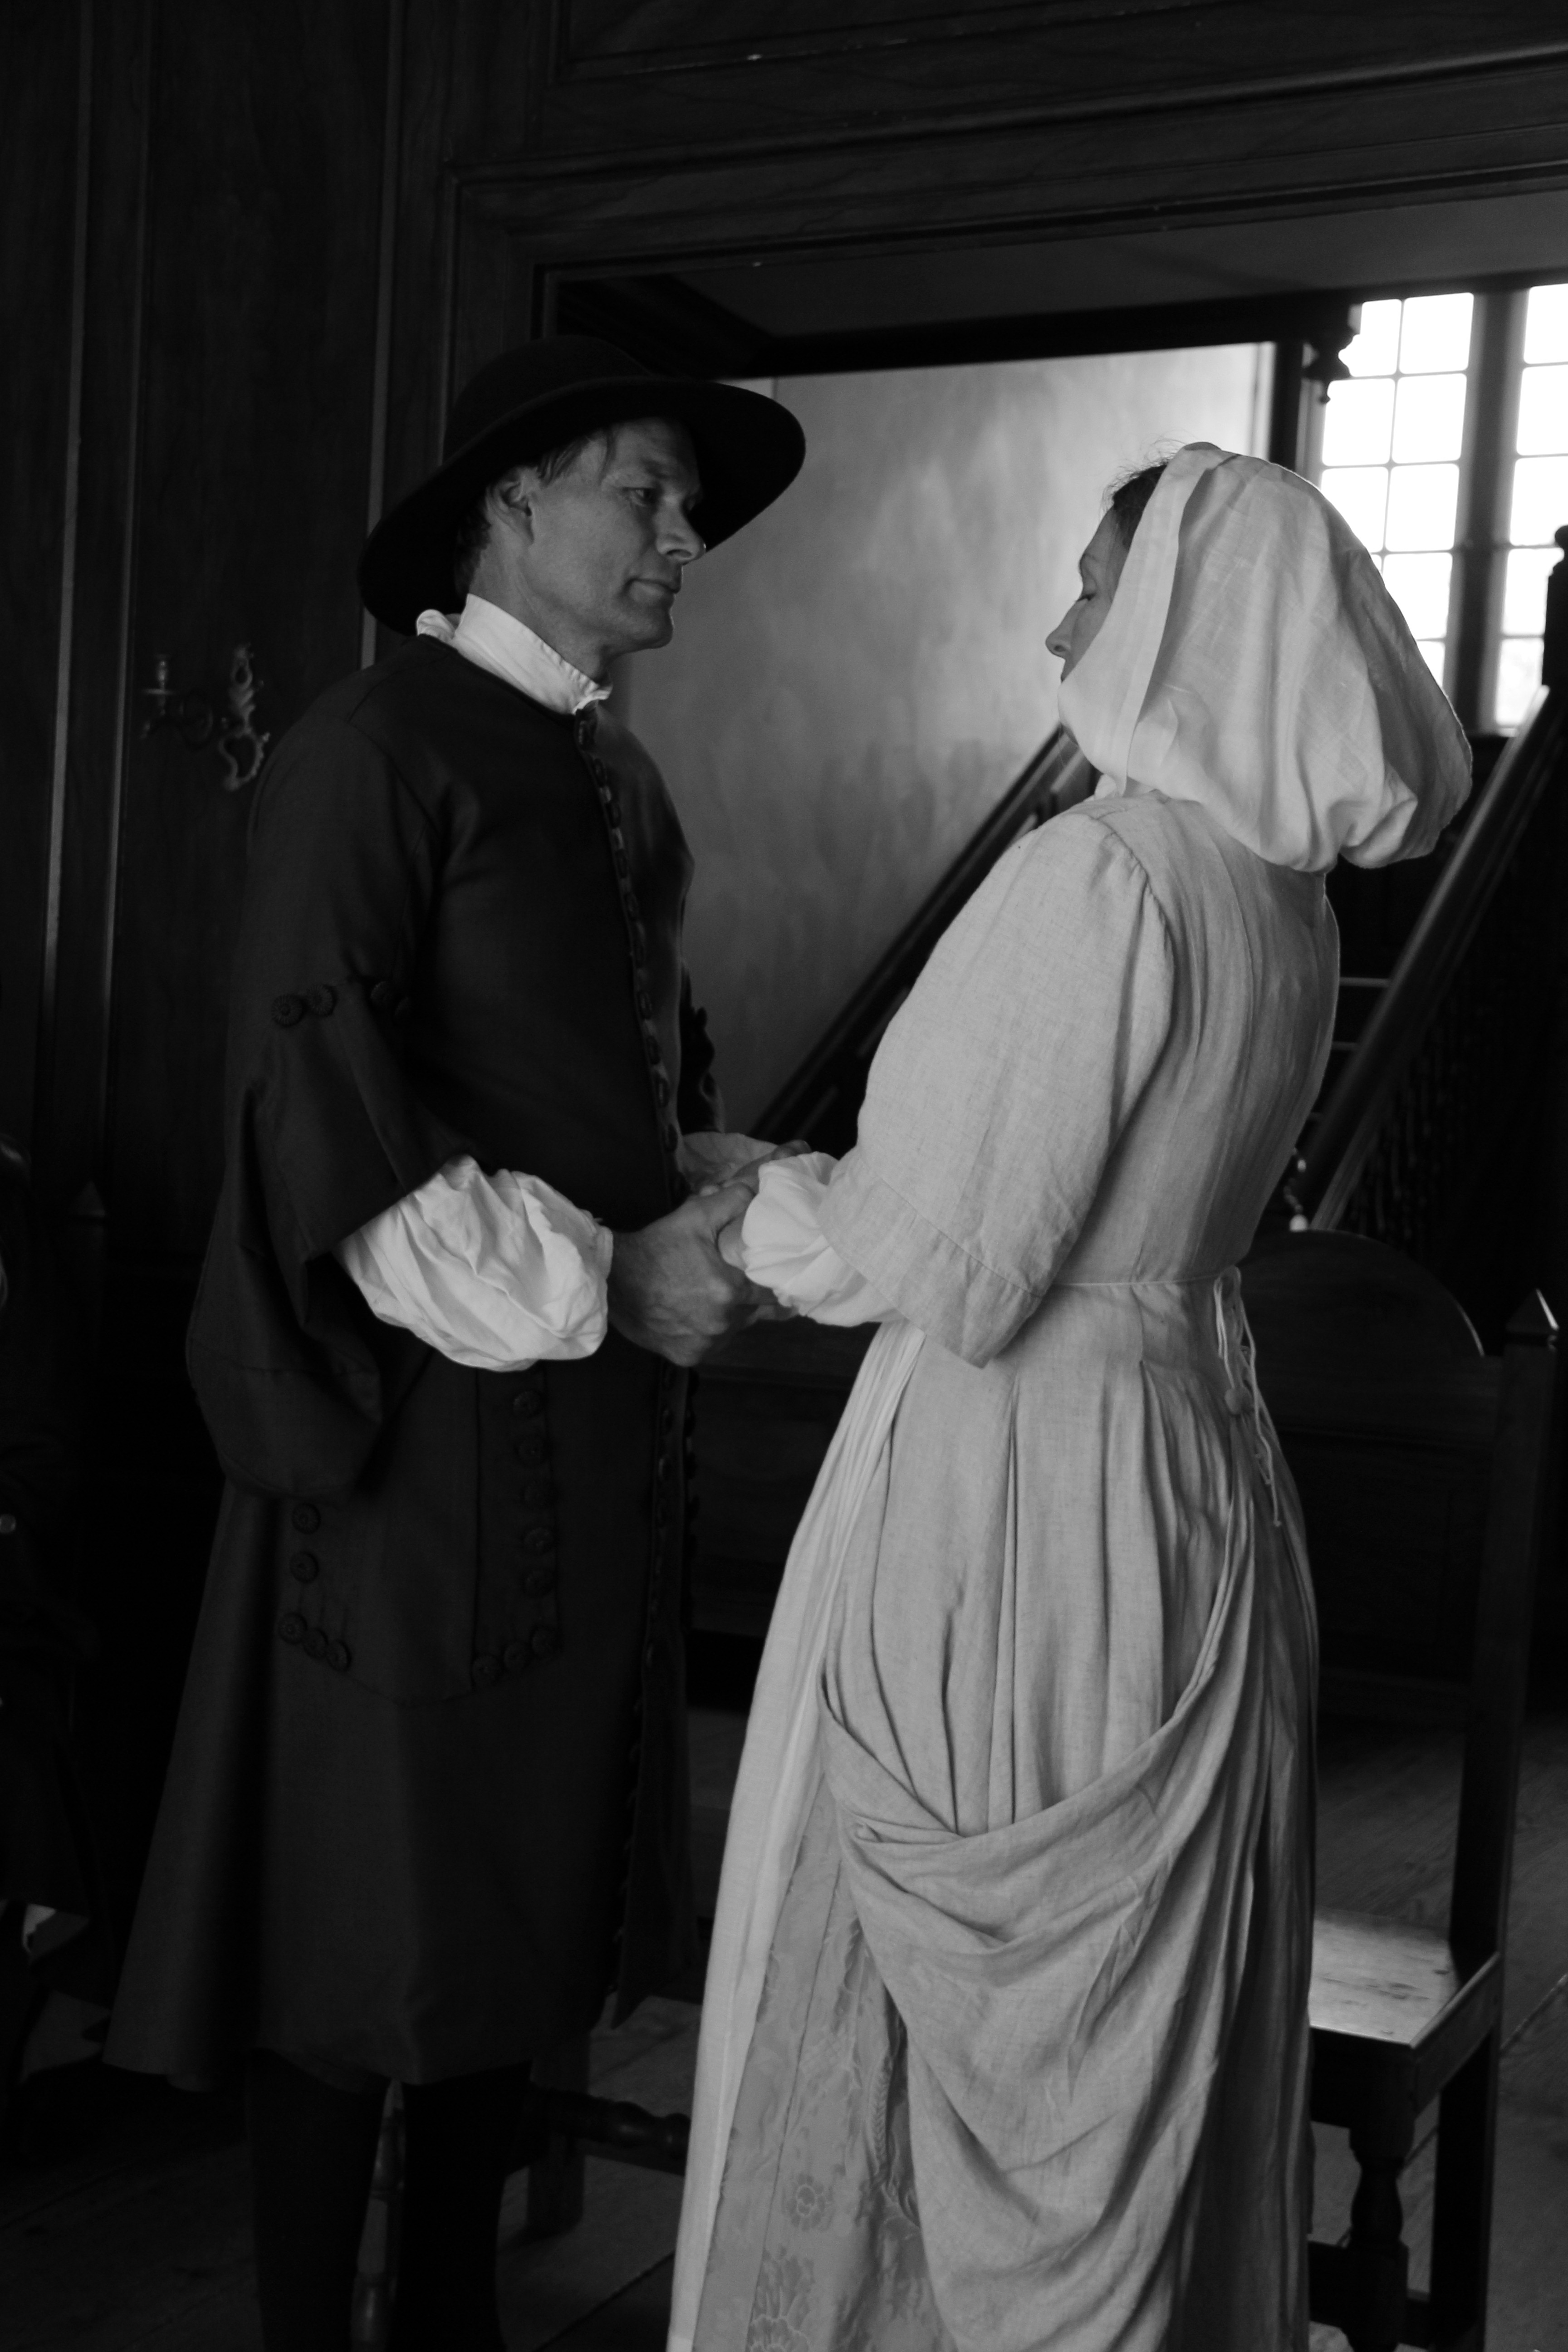 Mary Lofty and John Sotcher speaking their wedding vows.  Mary and John worked at Pennsbury Manor and were left as stewards of the estate when William and Hannah Penn left for England in 1701.